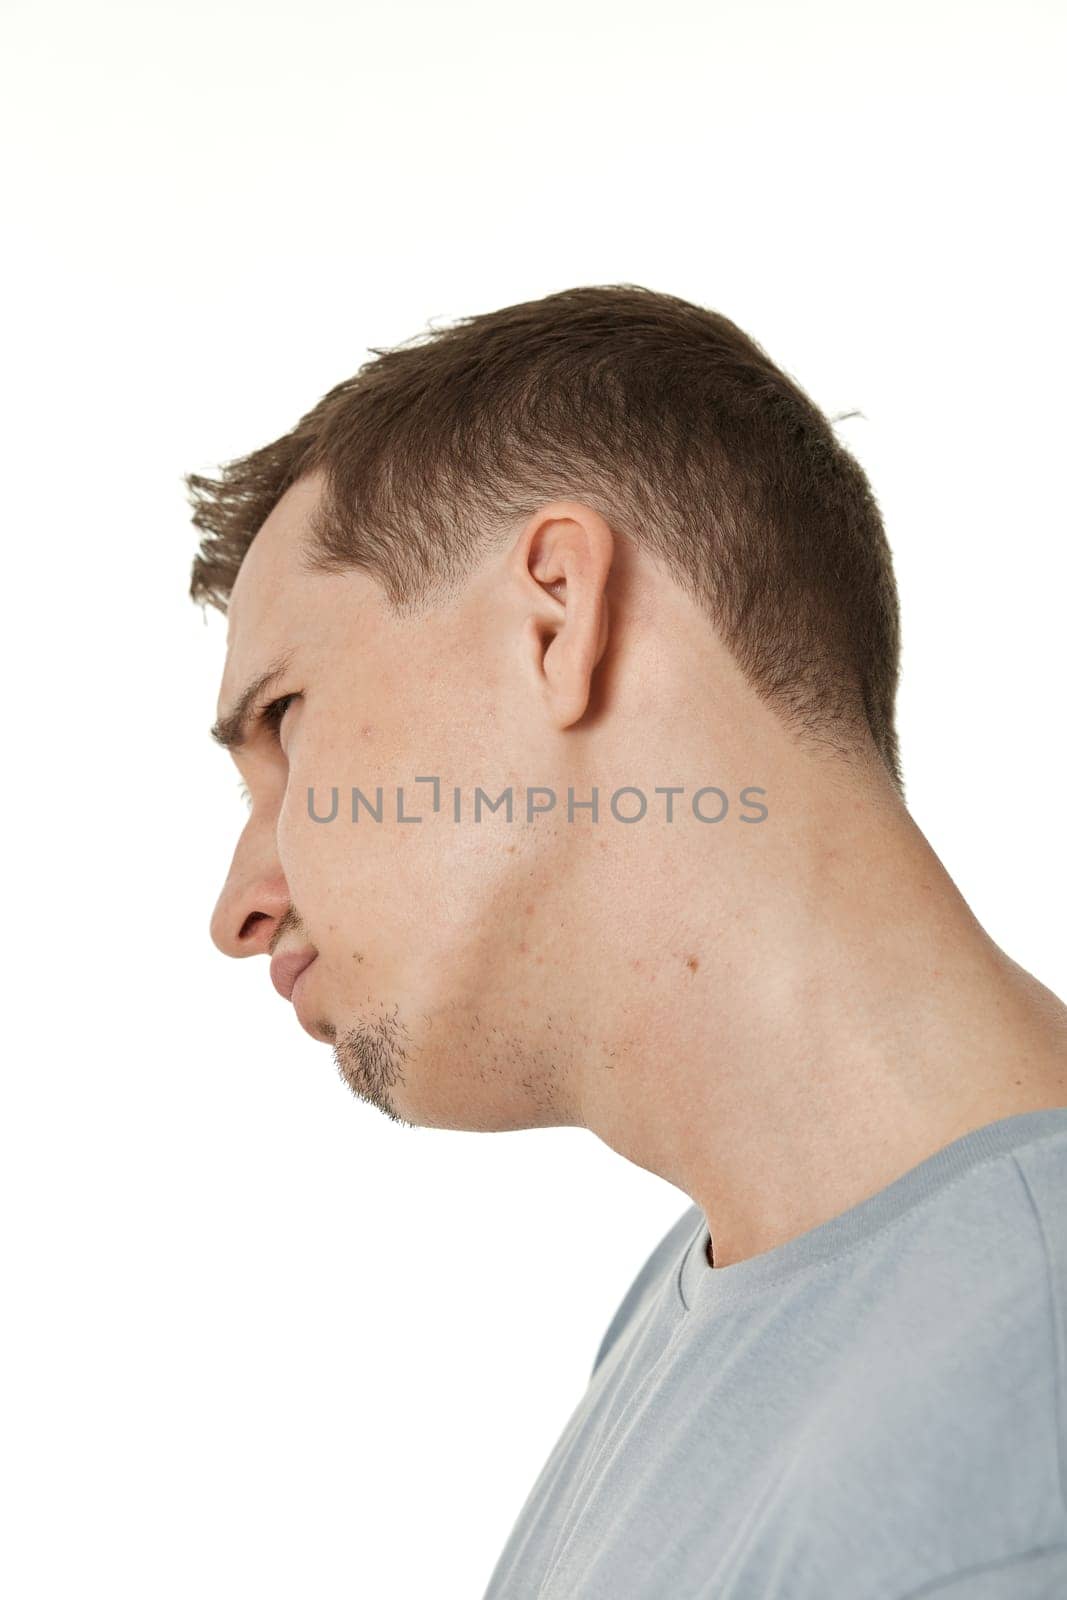 offended frustrated young man on white background. sadness